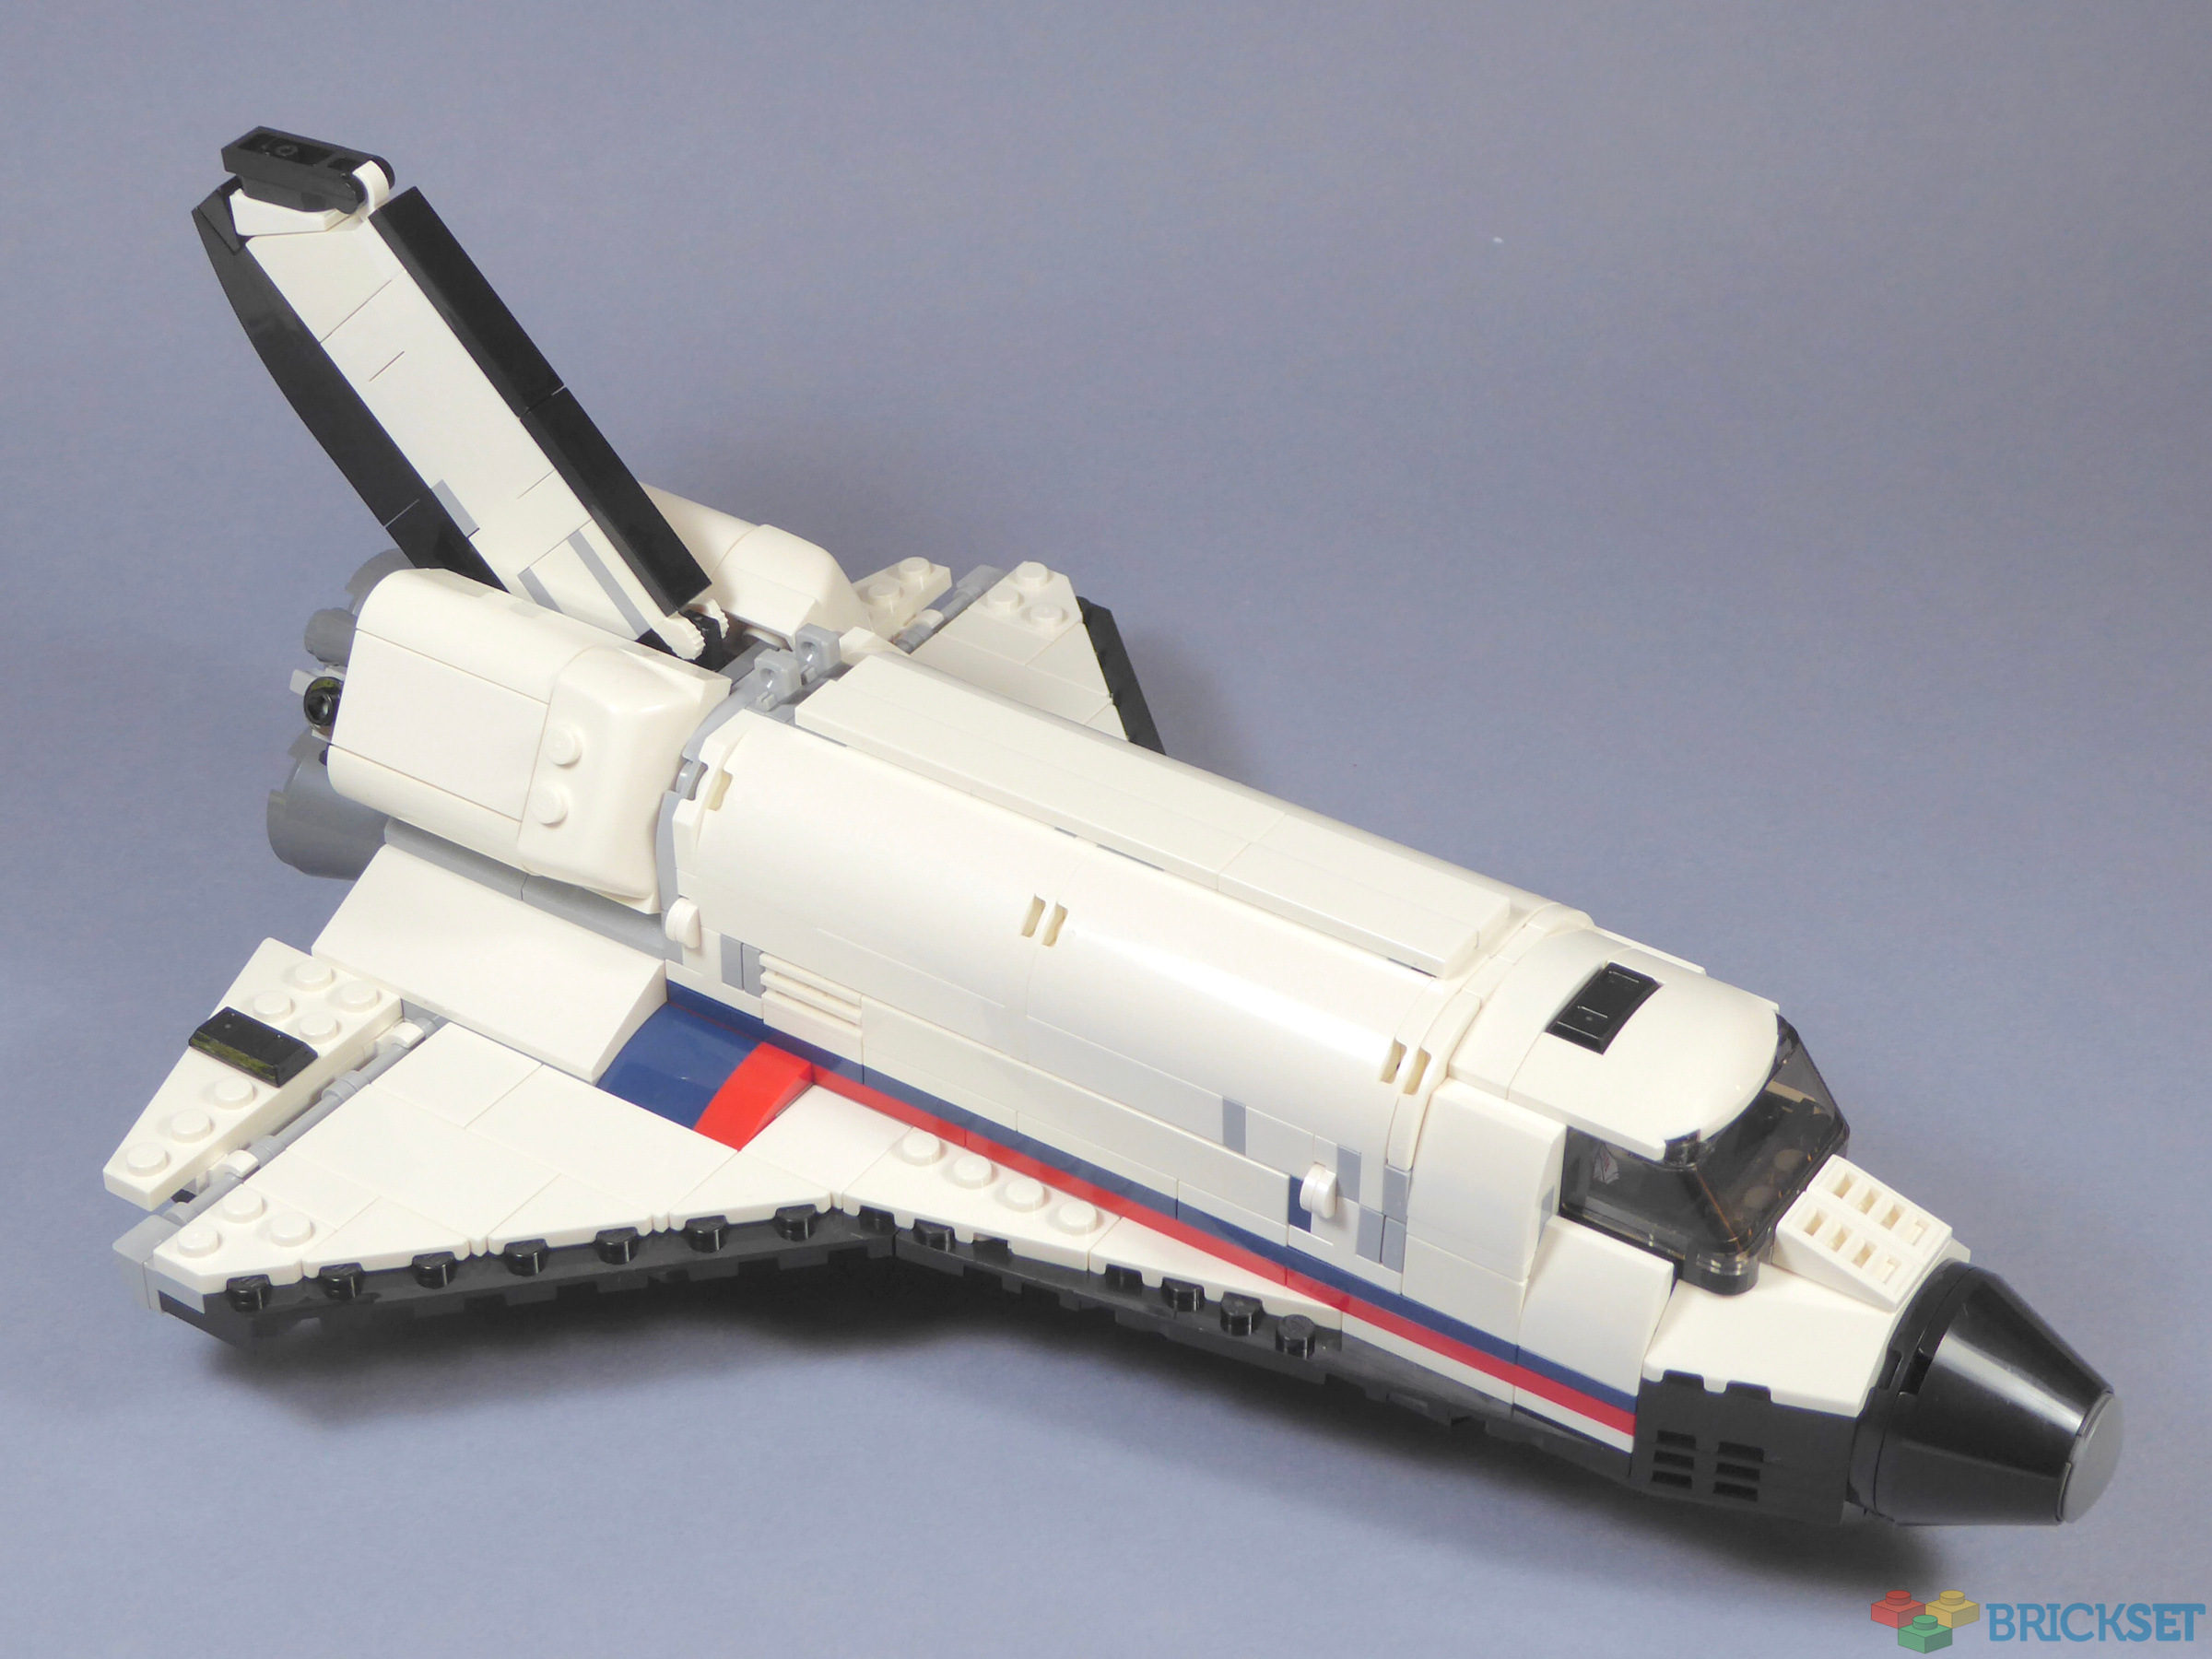 Review: 31117 Space Adventure | Brickset: LEGO guide and database